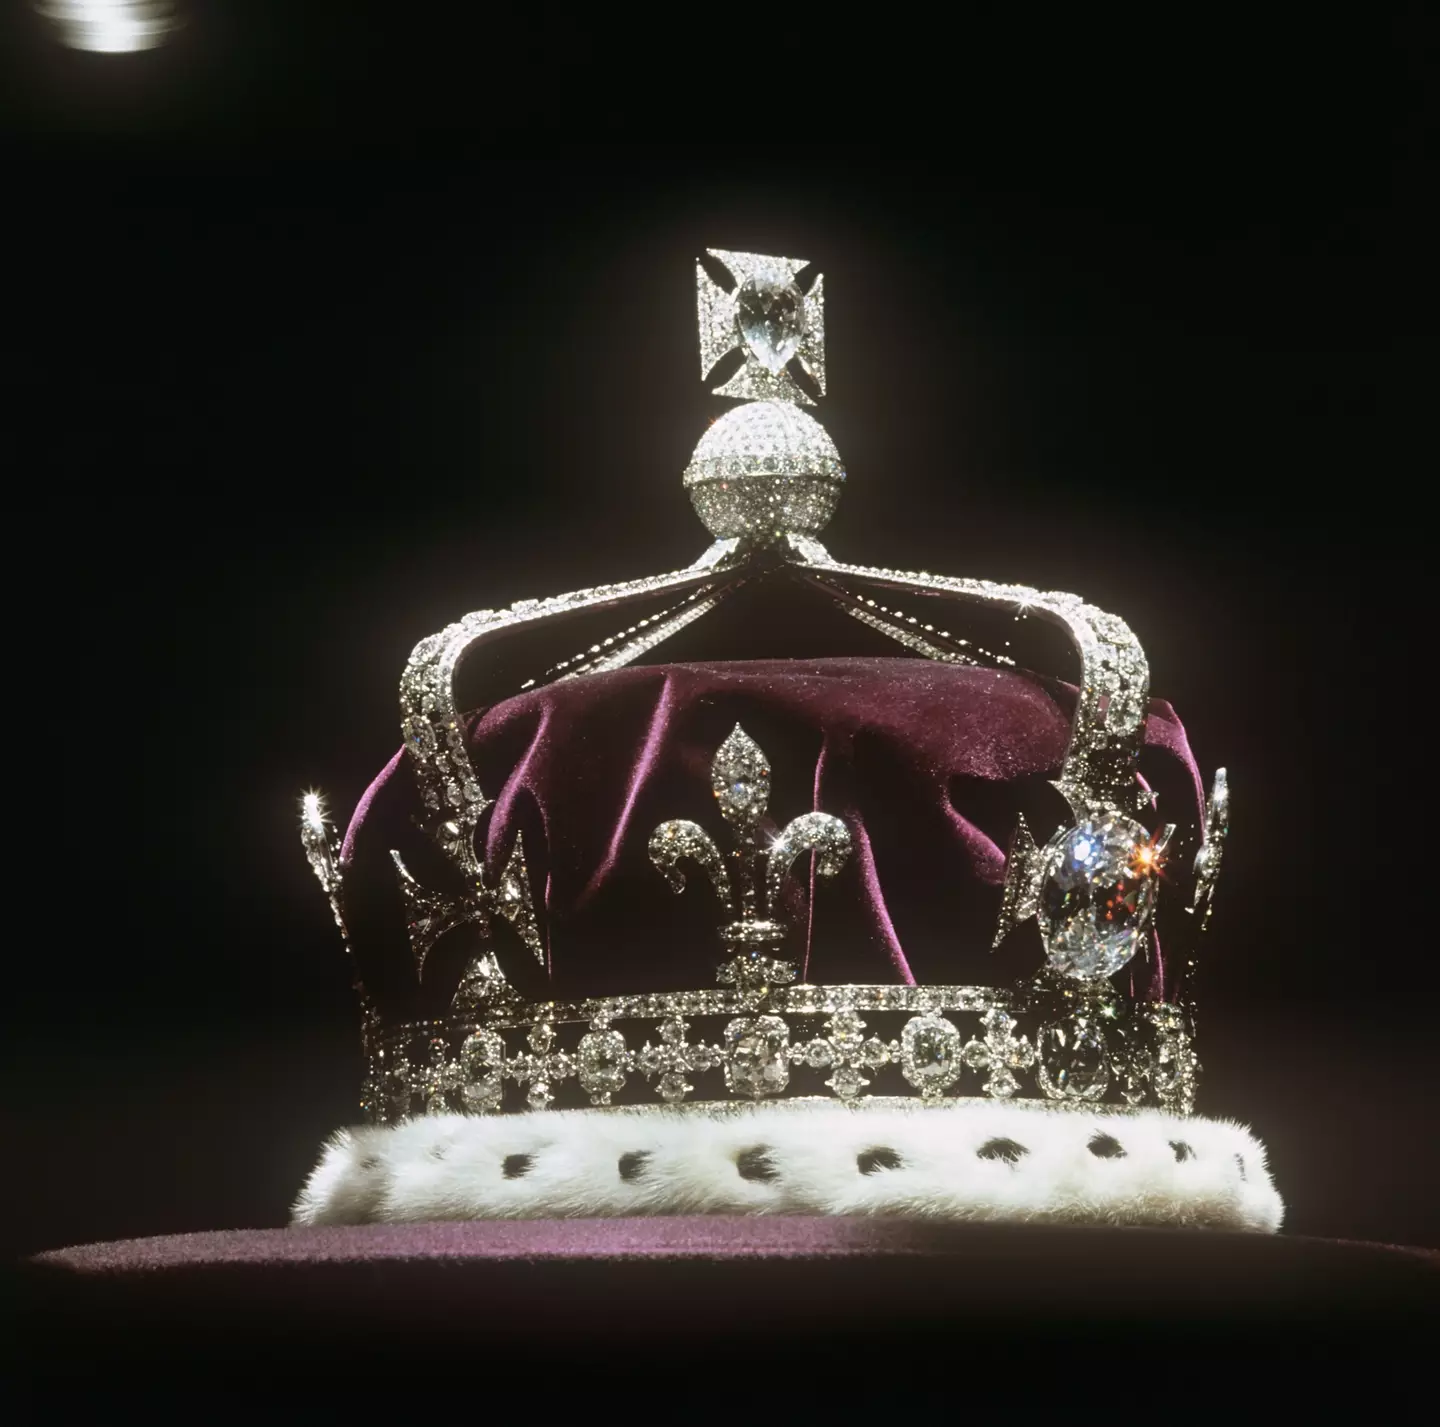 The Queen Mother's crown with the Koh-i-noor Diamond.